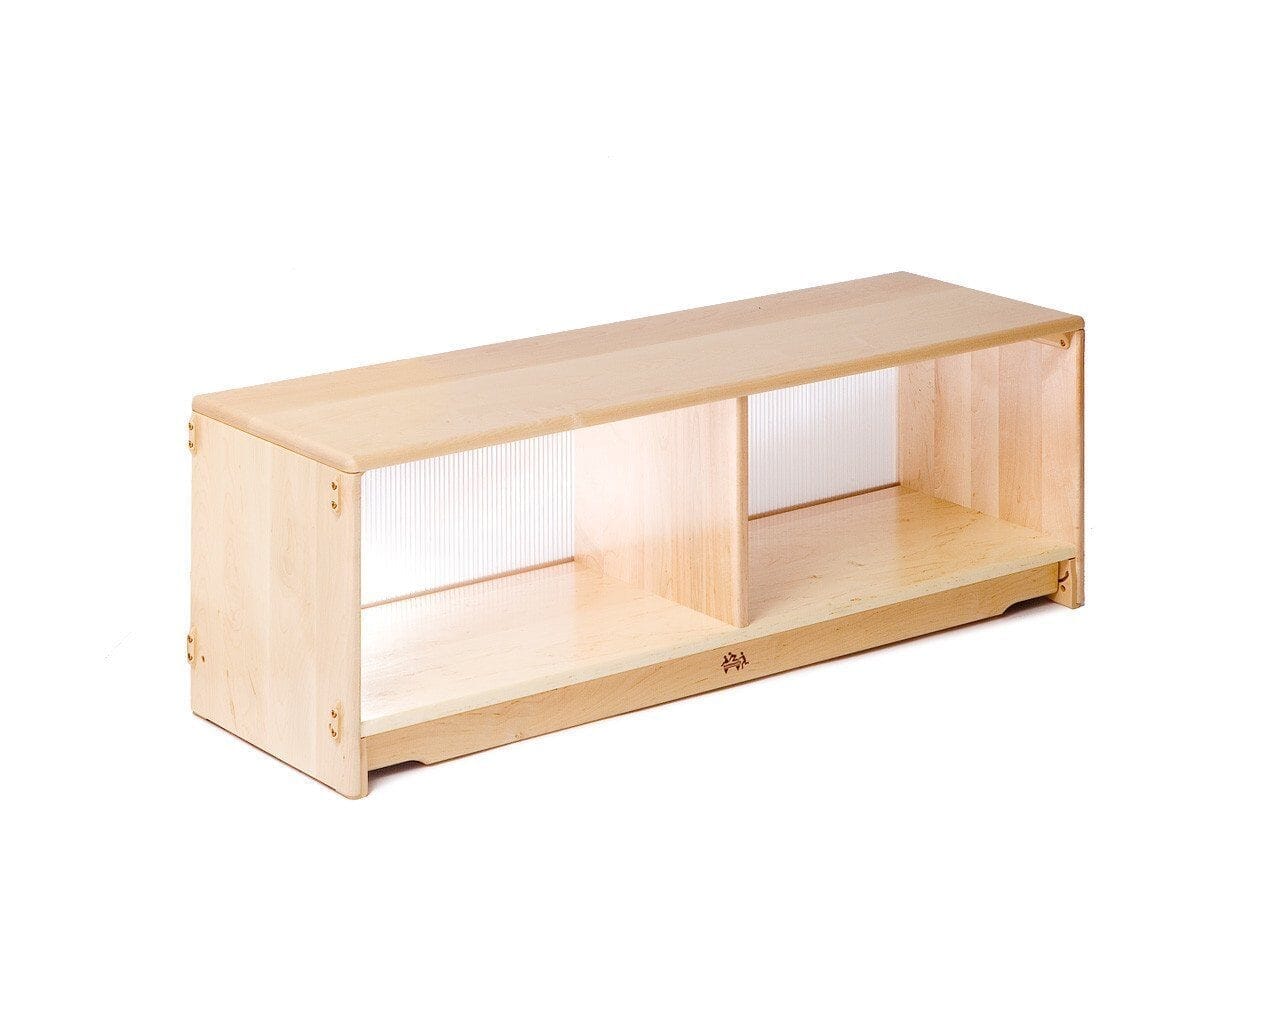 AS IS Translucent Fixed Shelf 4'X16" by Community Playthings - louisekool